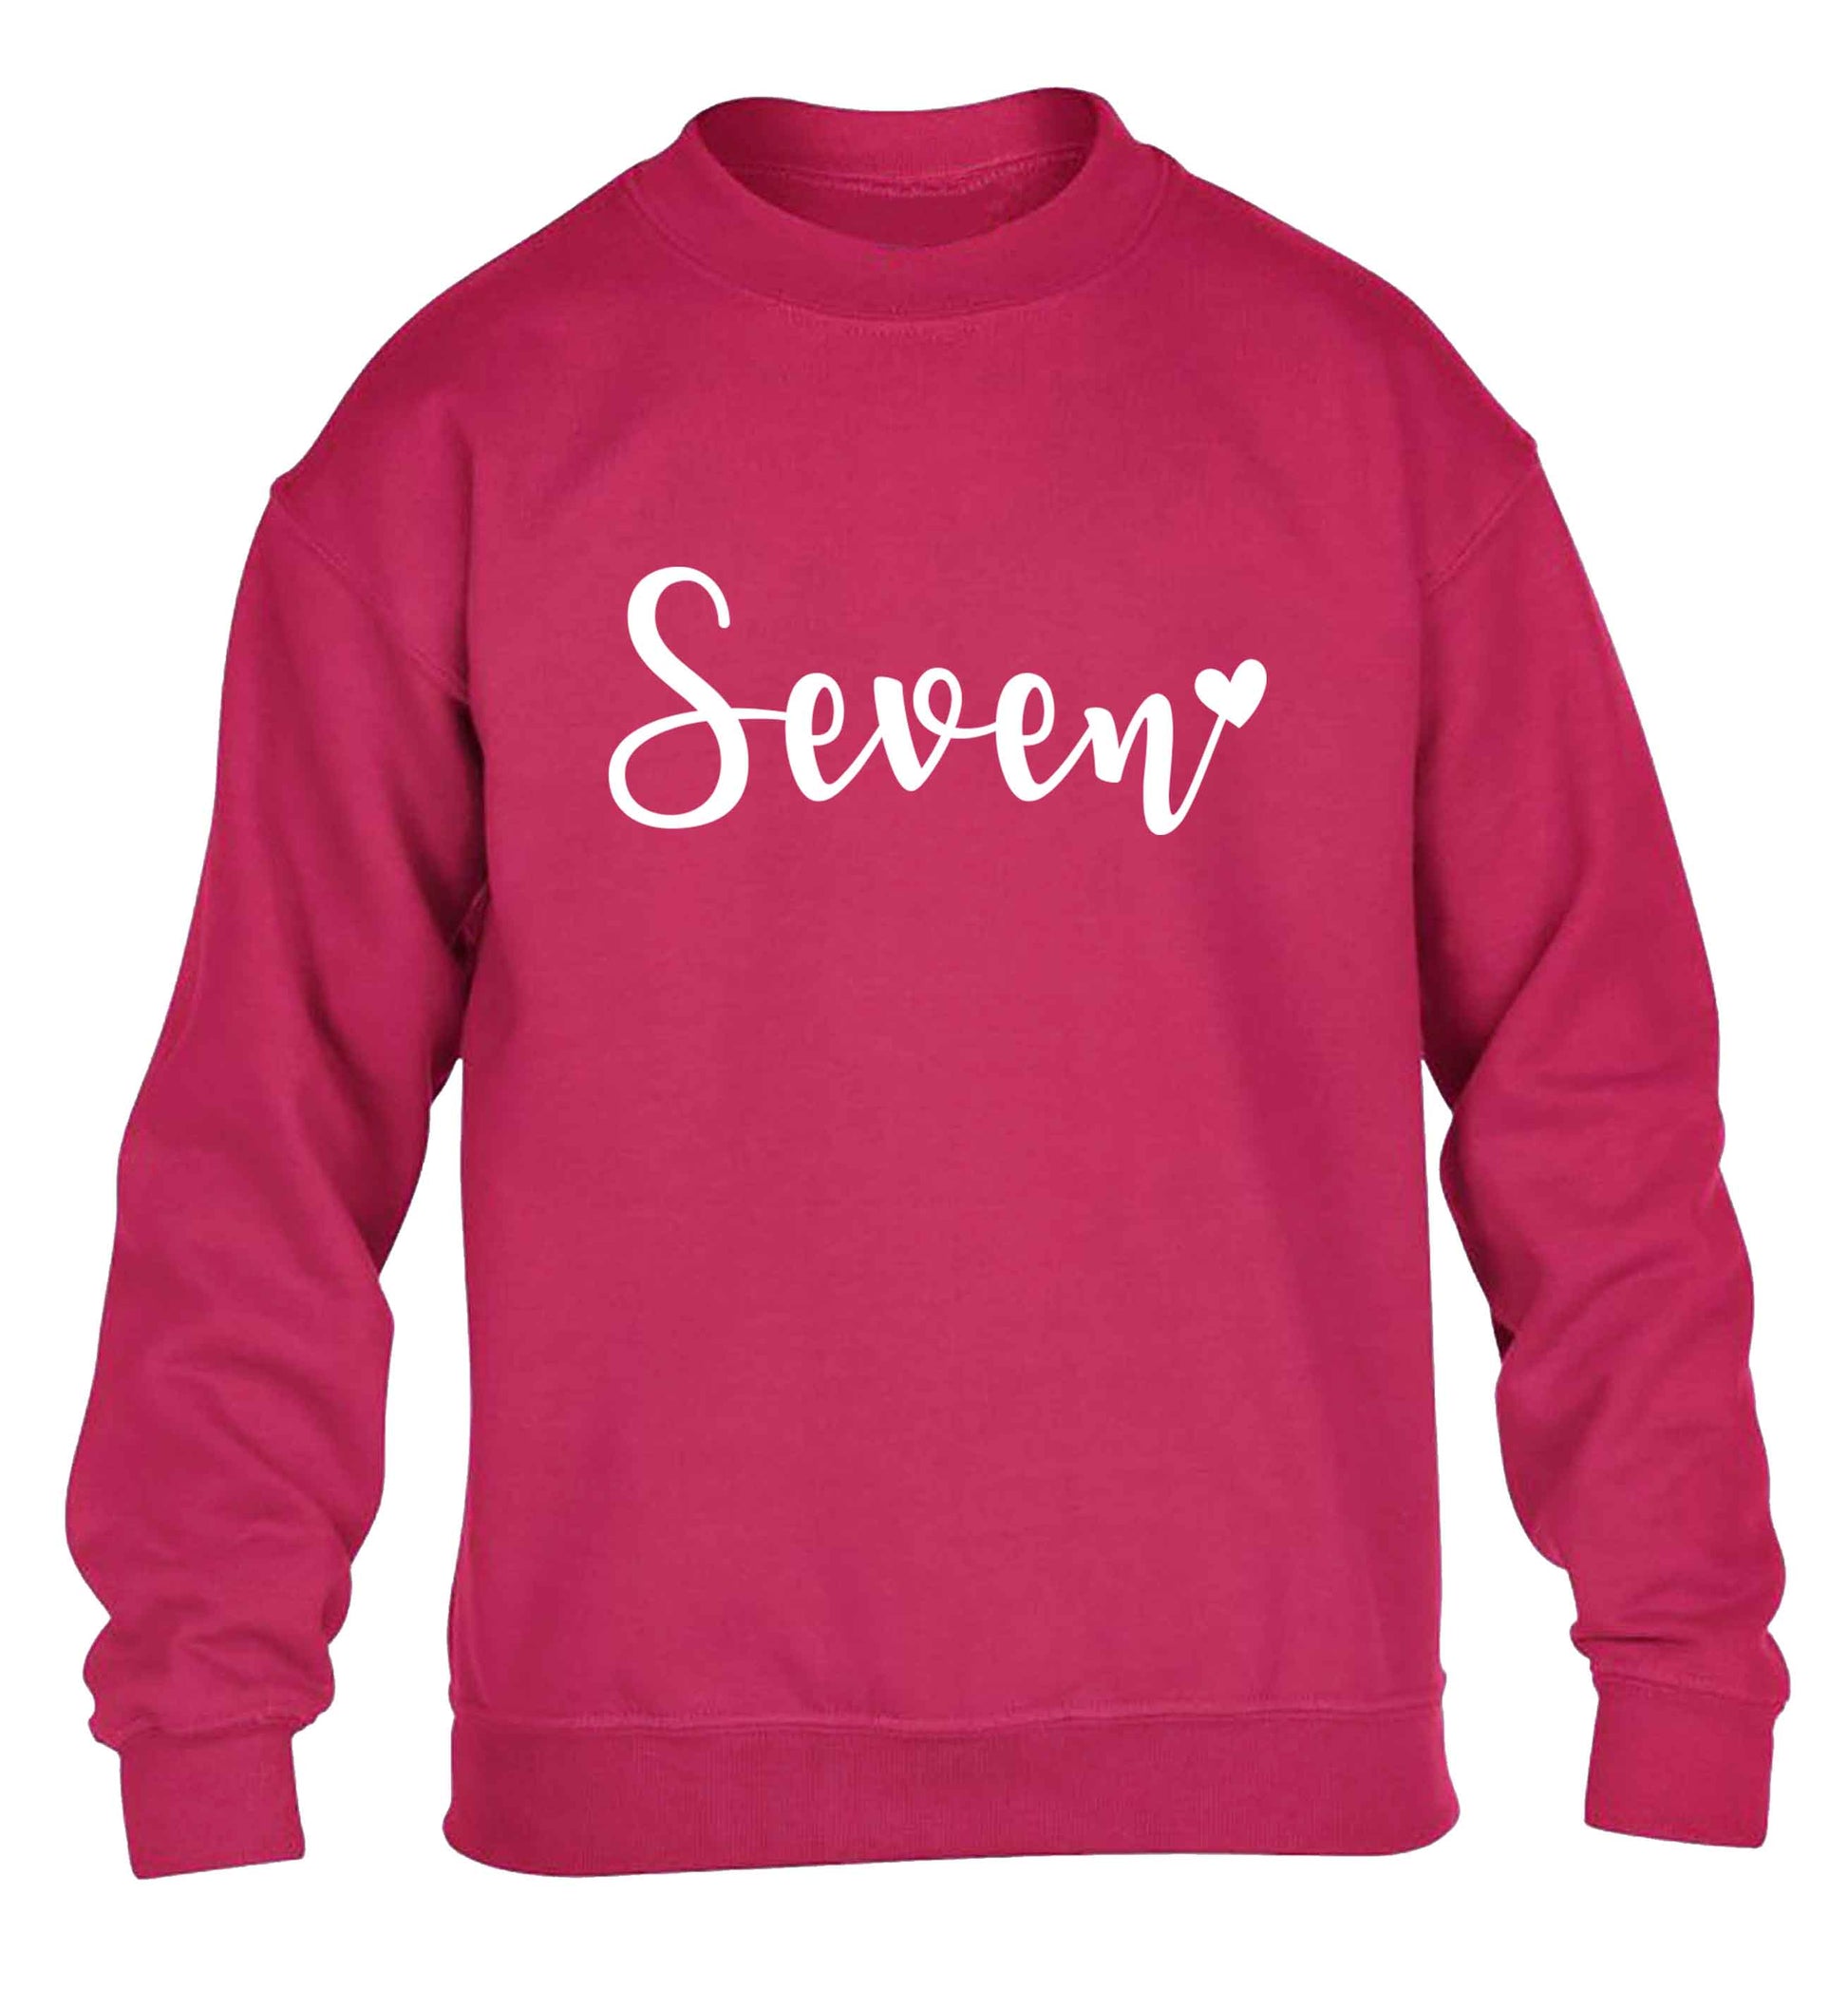 Seven and heart children's pink sweater 12-13 Years